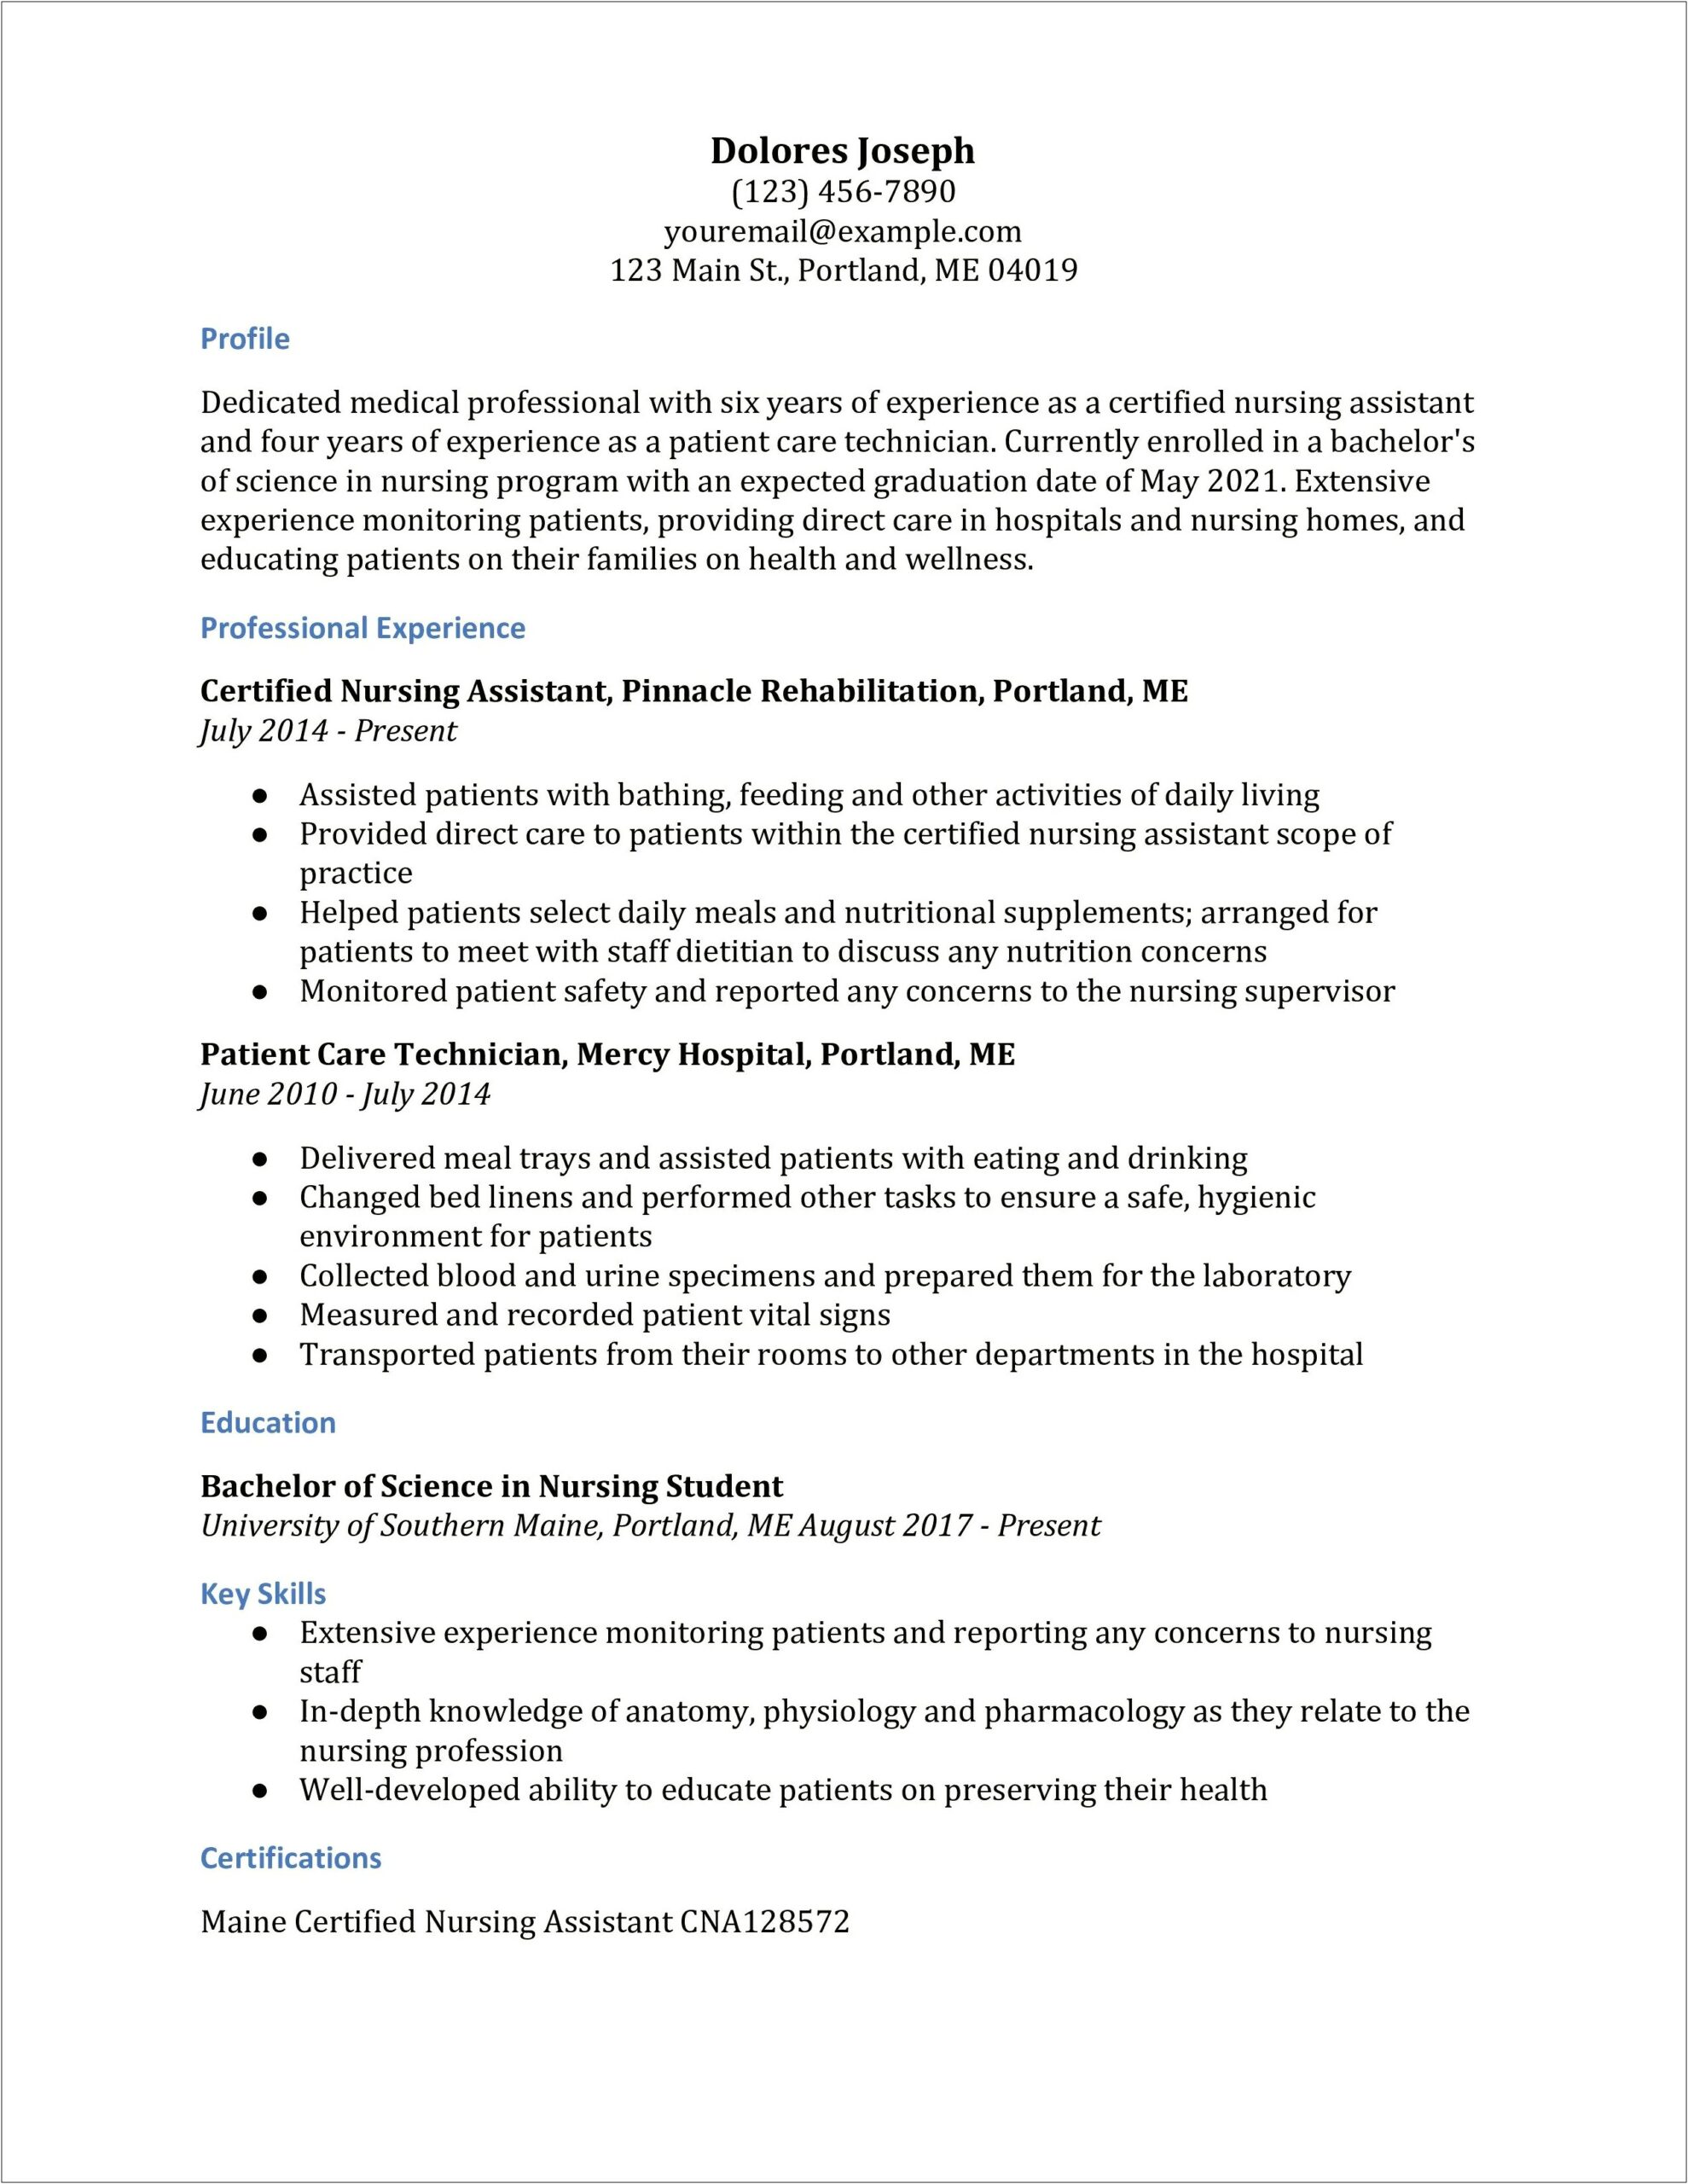 Resume Examples With Expected Graduation Date